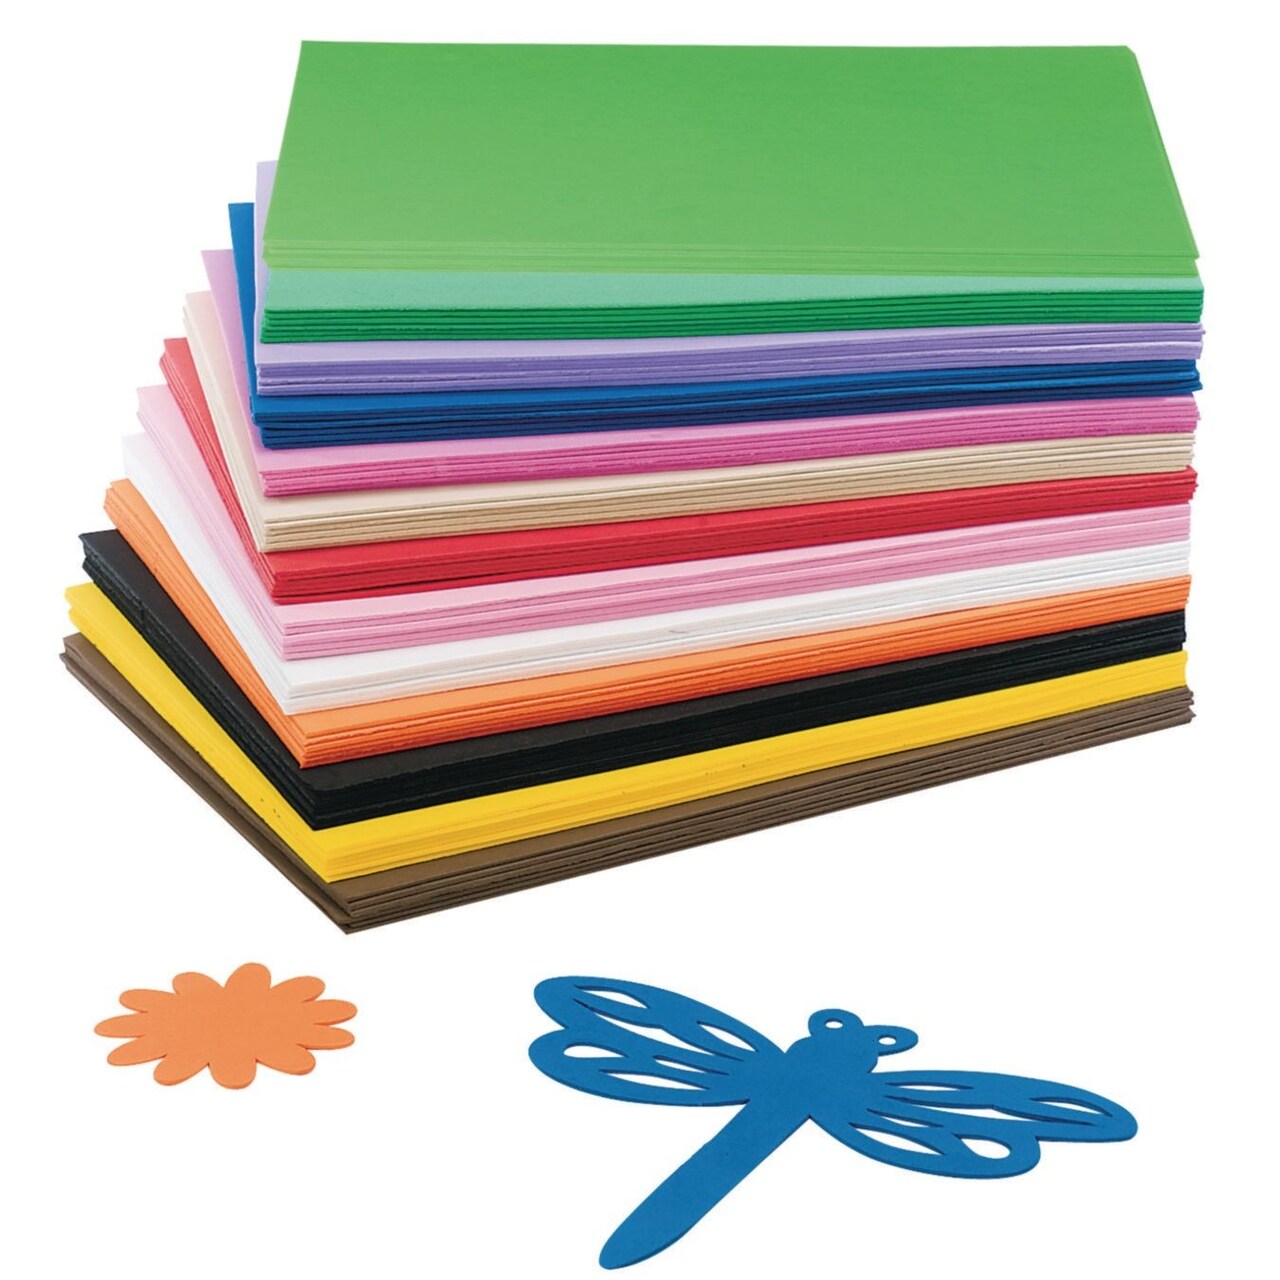 S&S Worldwide Color Splash! EVA Foam Sheets Assortment, 6 Each of 13 Bright  Colors Kids Love, Cut to Any Shape With Scissors, 9 x 12 x 2mm thick.  Pack of 78.